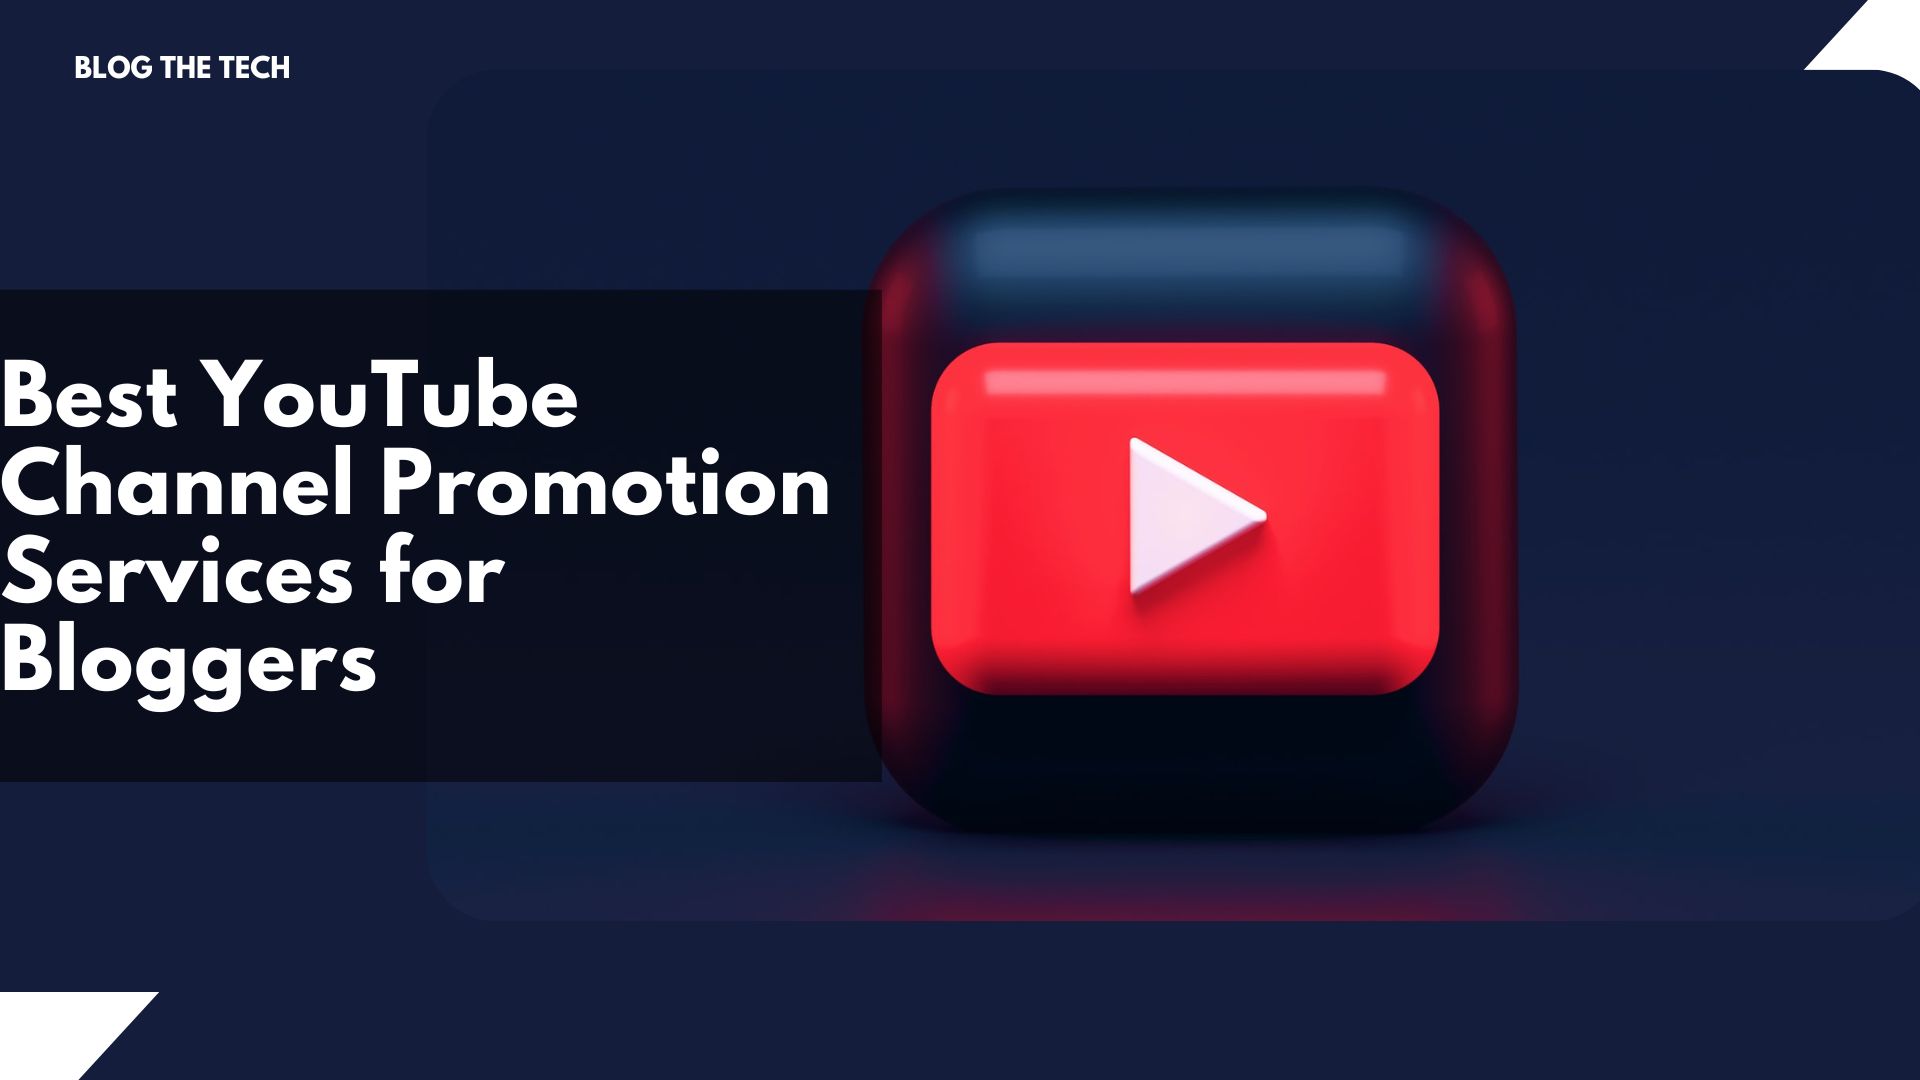 Best YouTube Channel Promotion Services for Bloggers